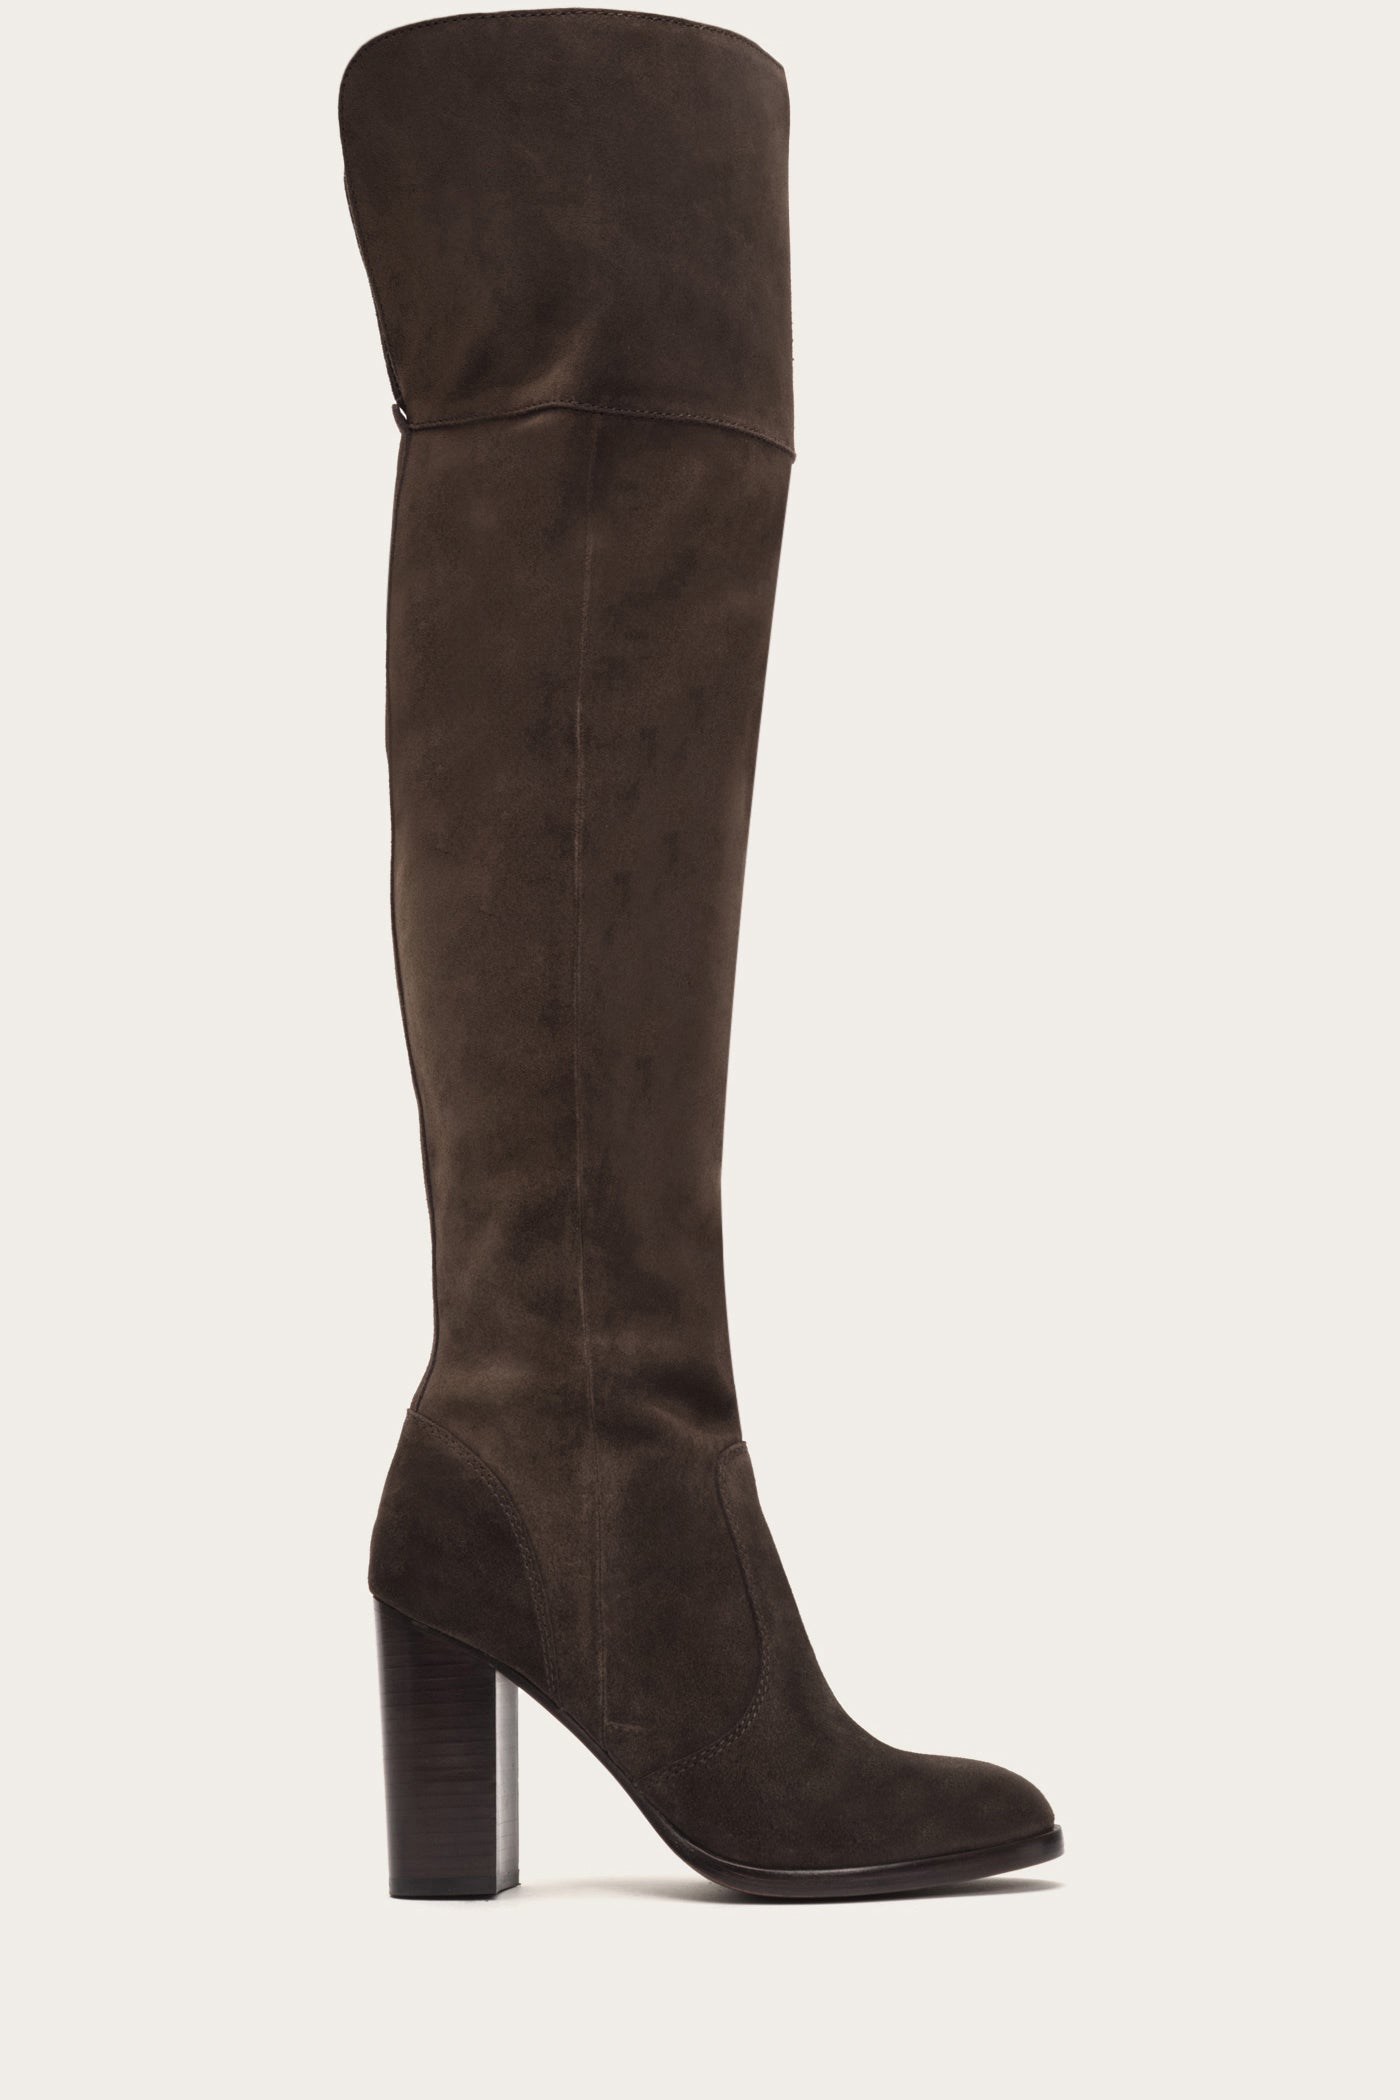 frye over the knee boot